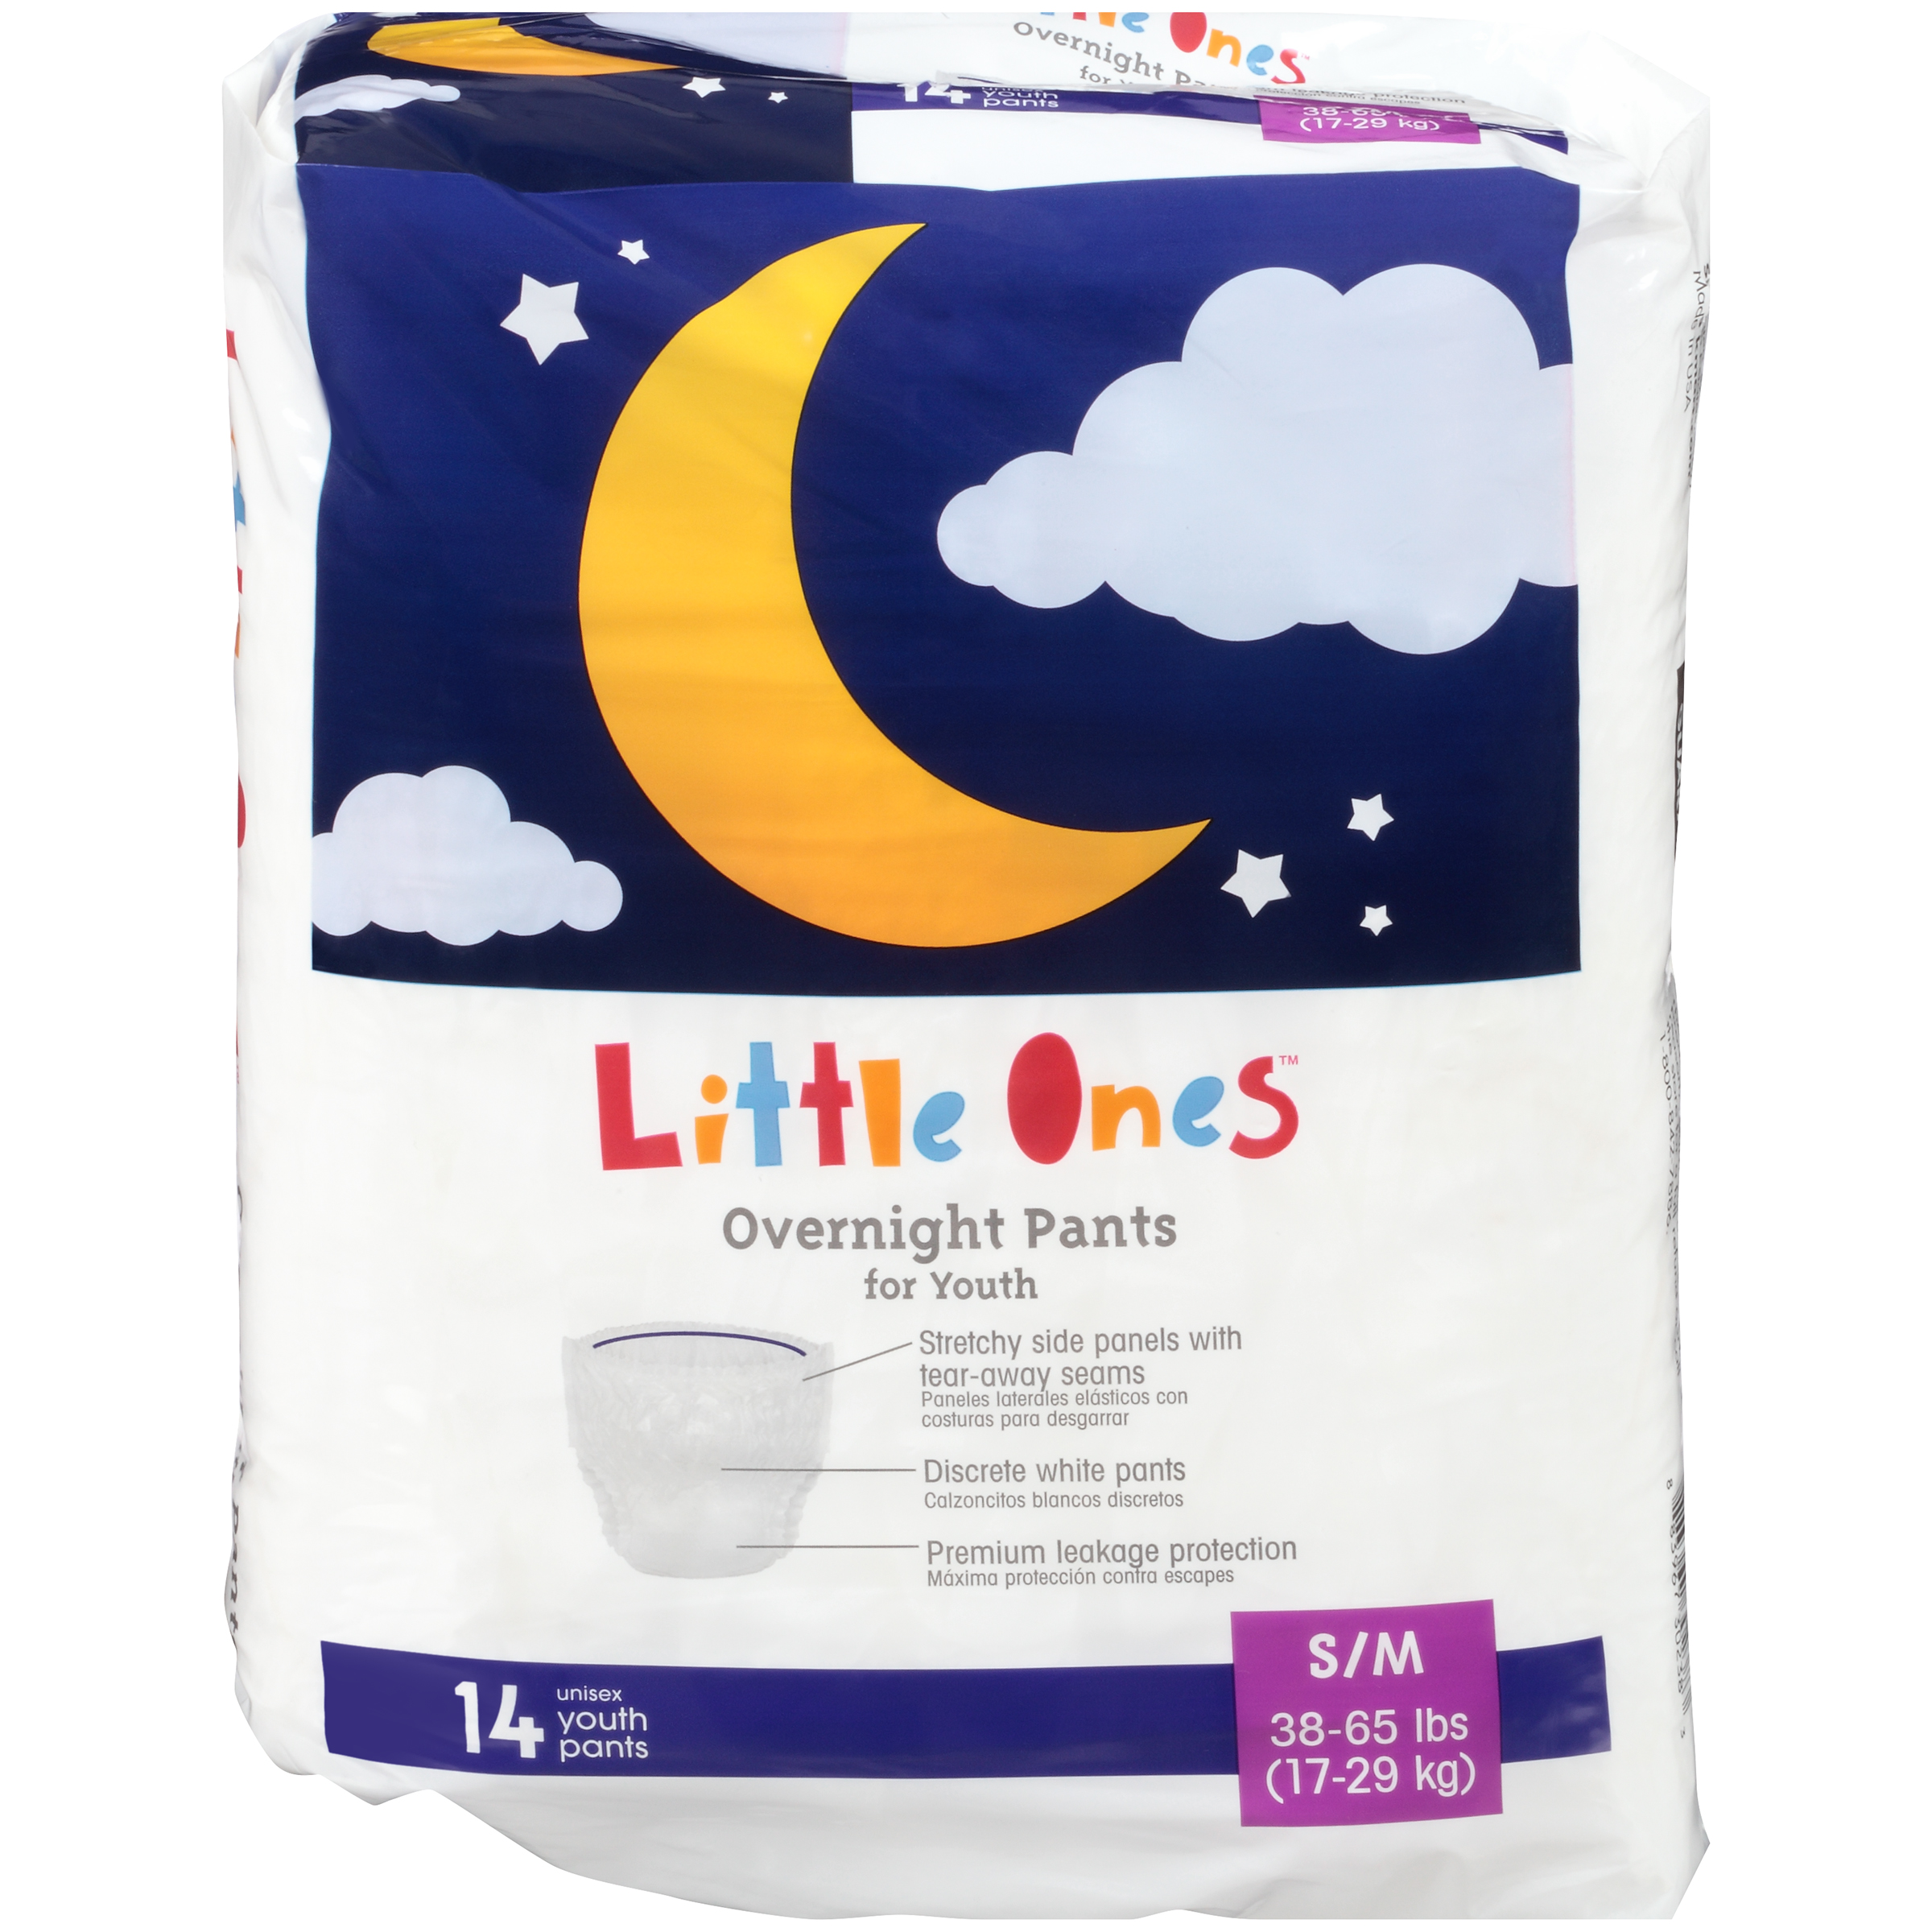 Little Ones Overnight Pants for Youth, Unisex (see all sizes)